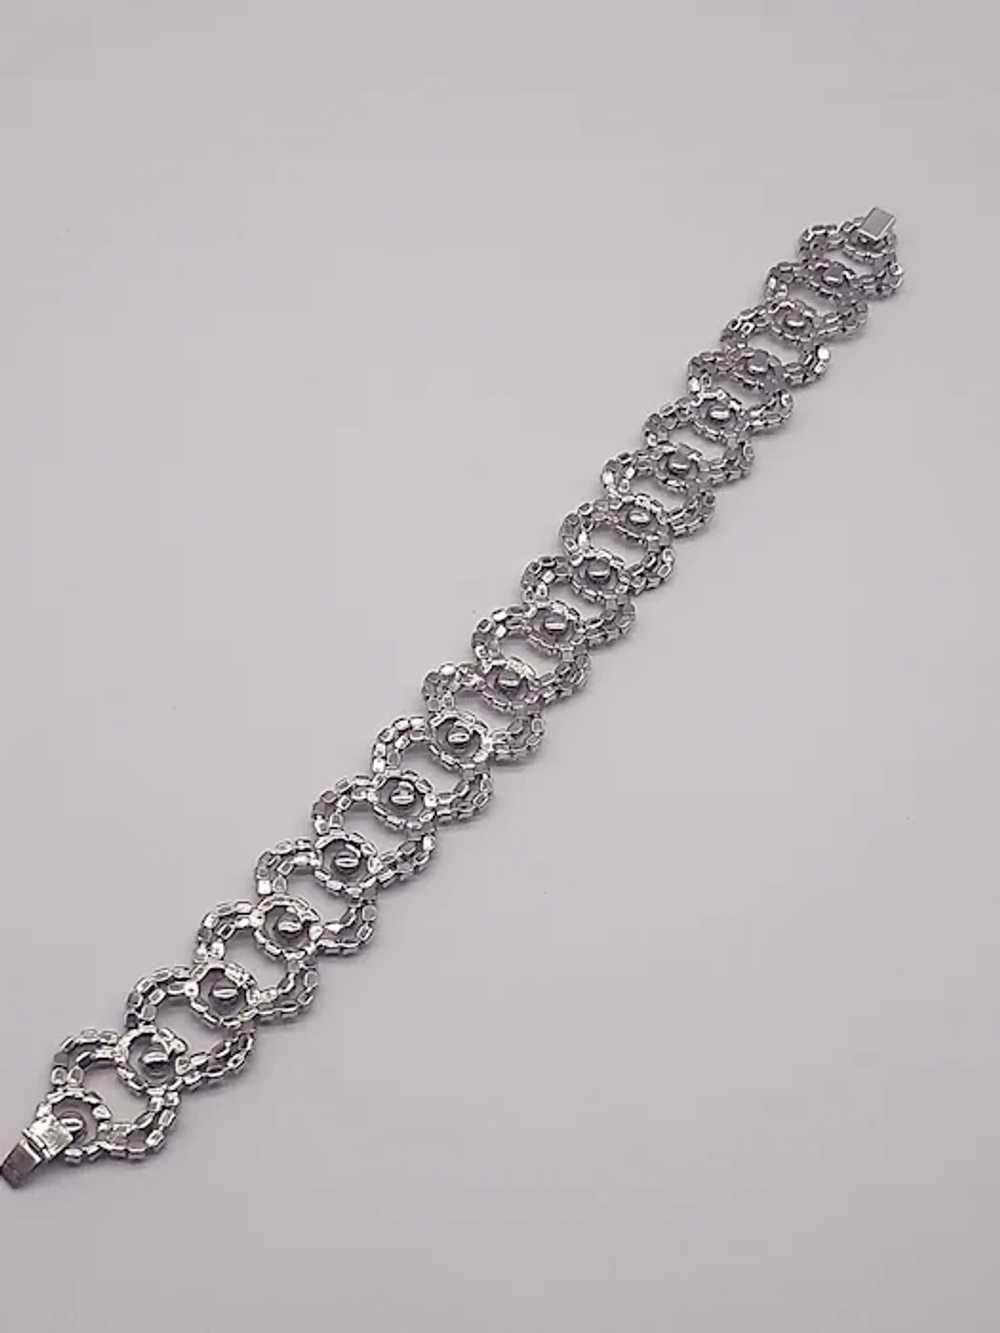 Vintage clear silver tone chocker necklace - image 10